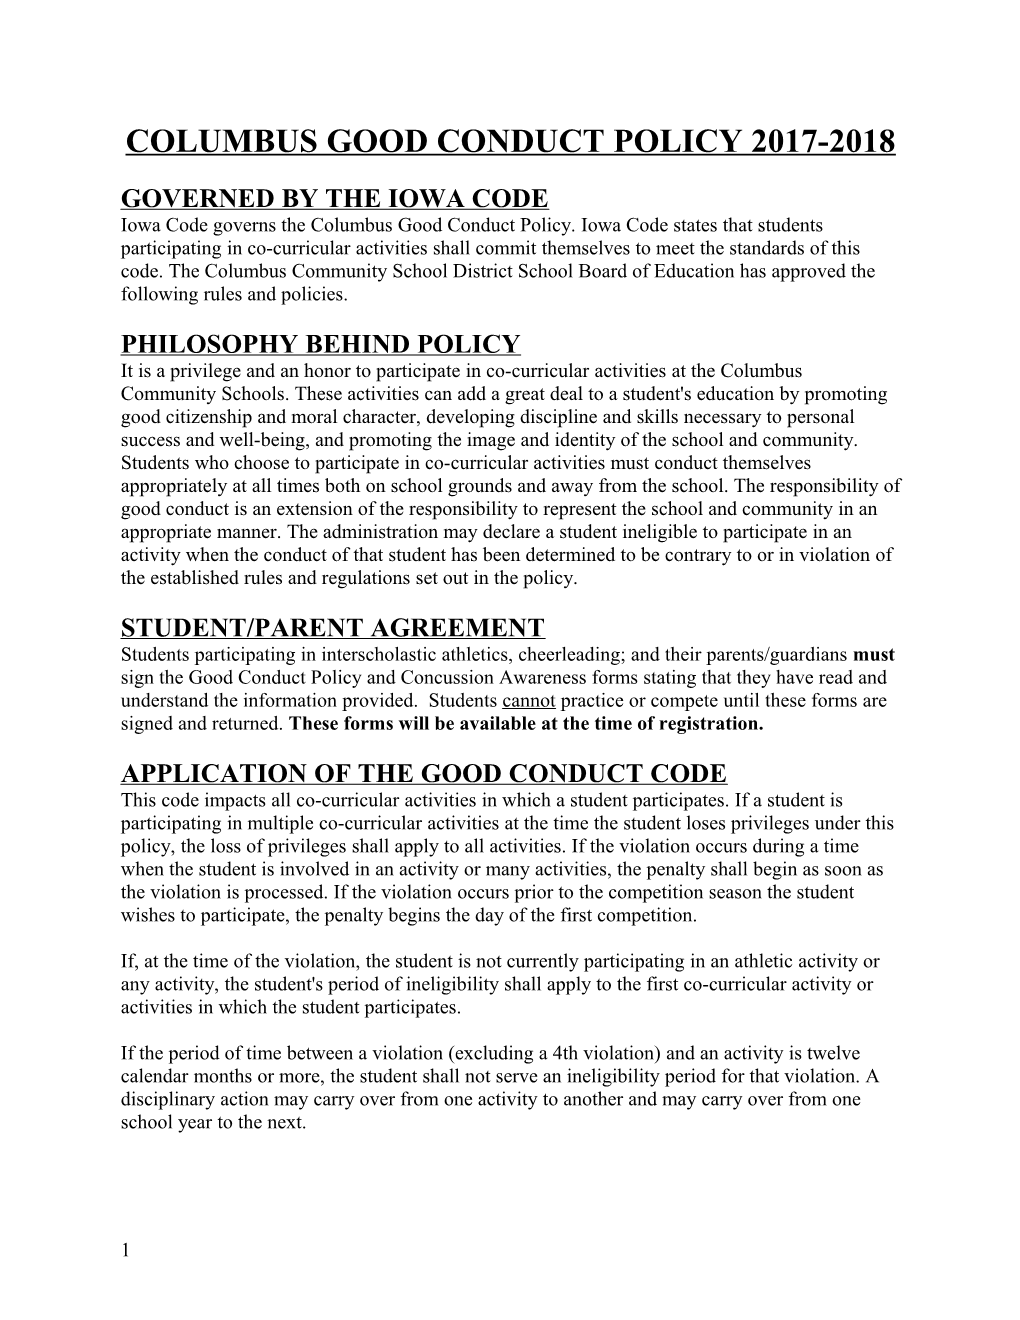 Columbus Good Conduct Policy 2017-2018